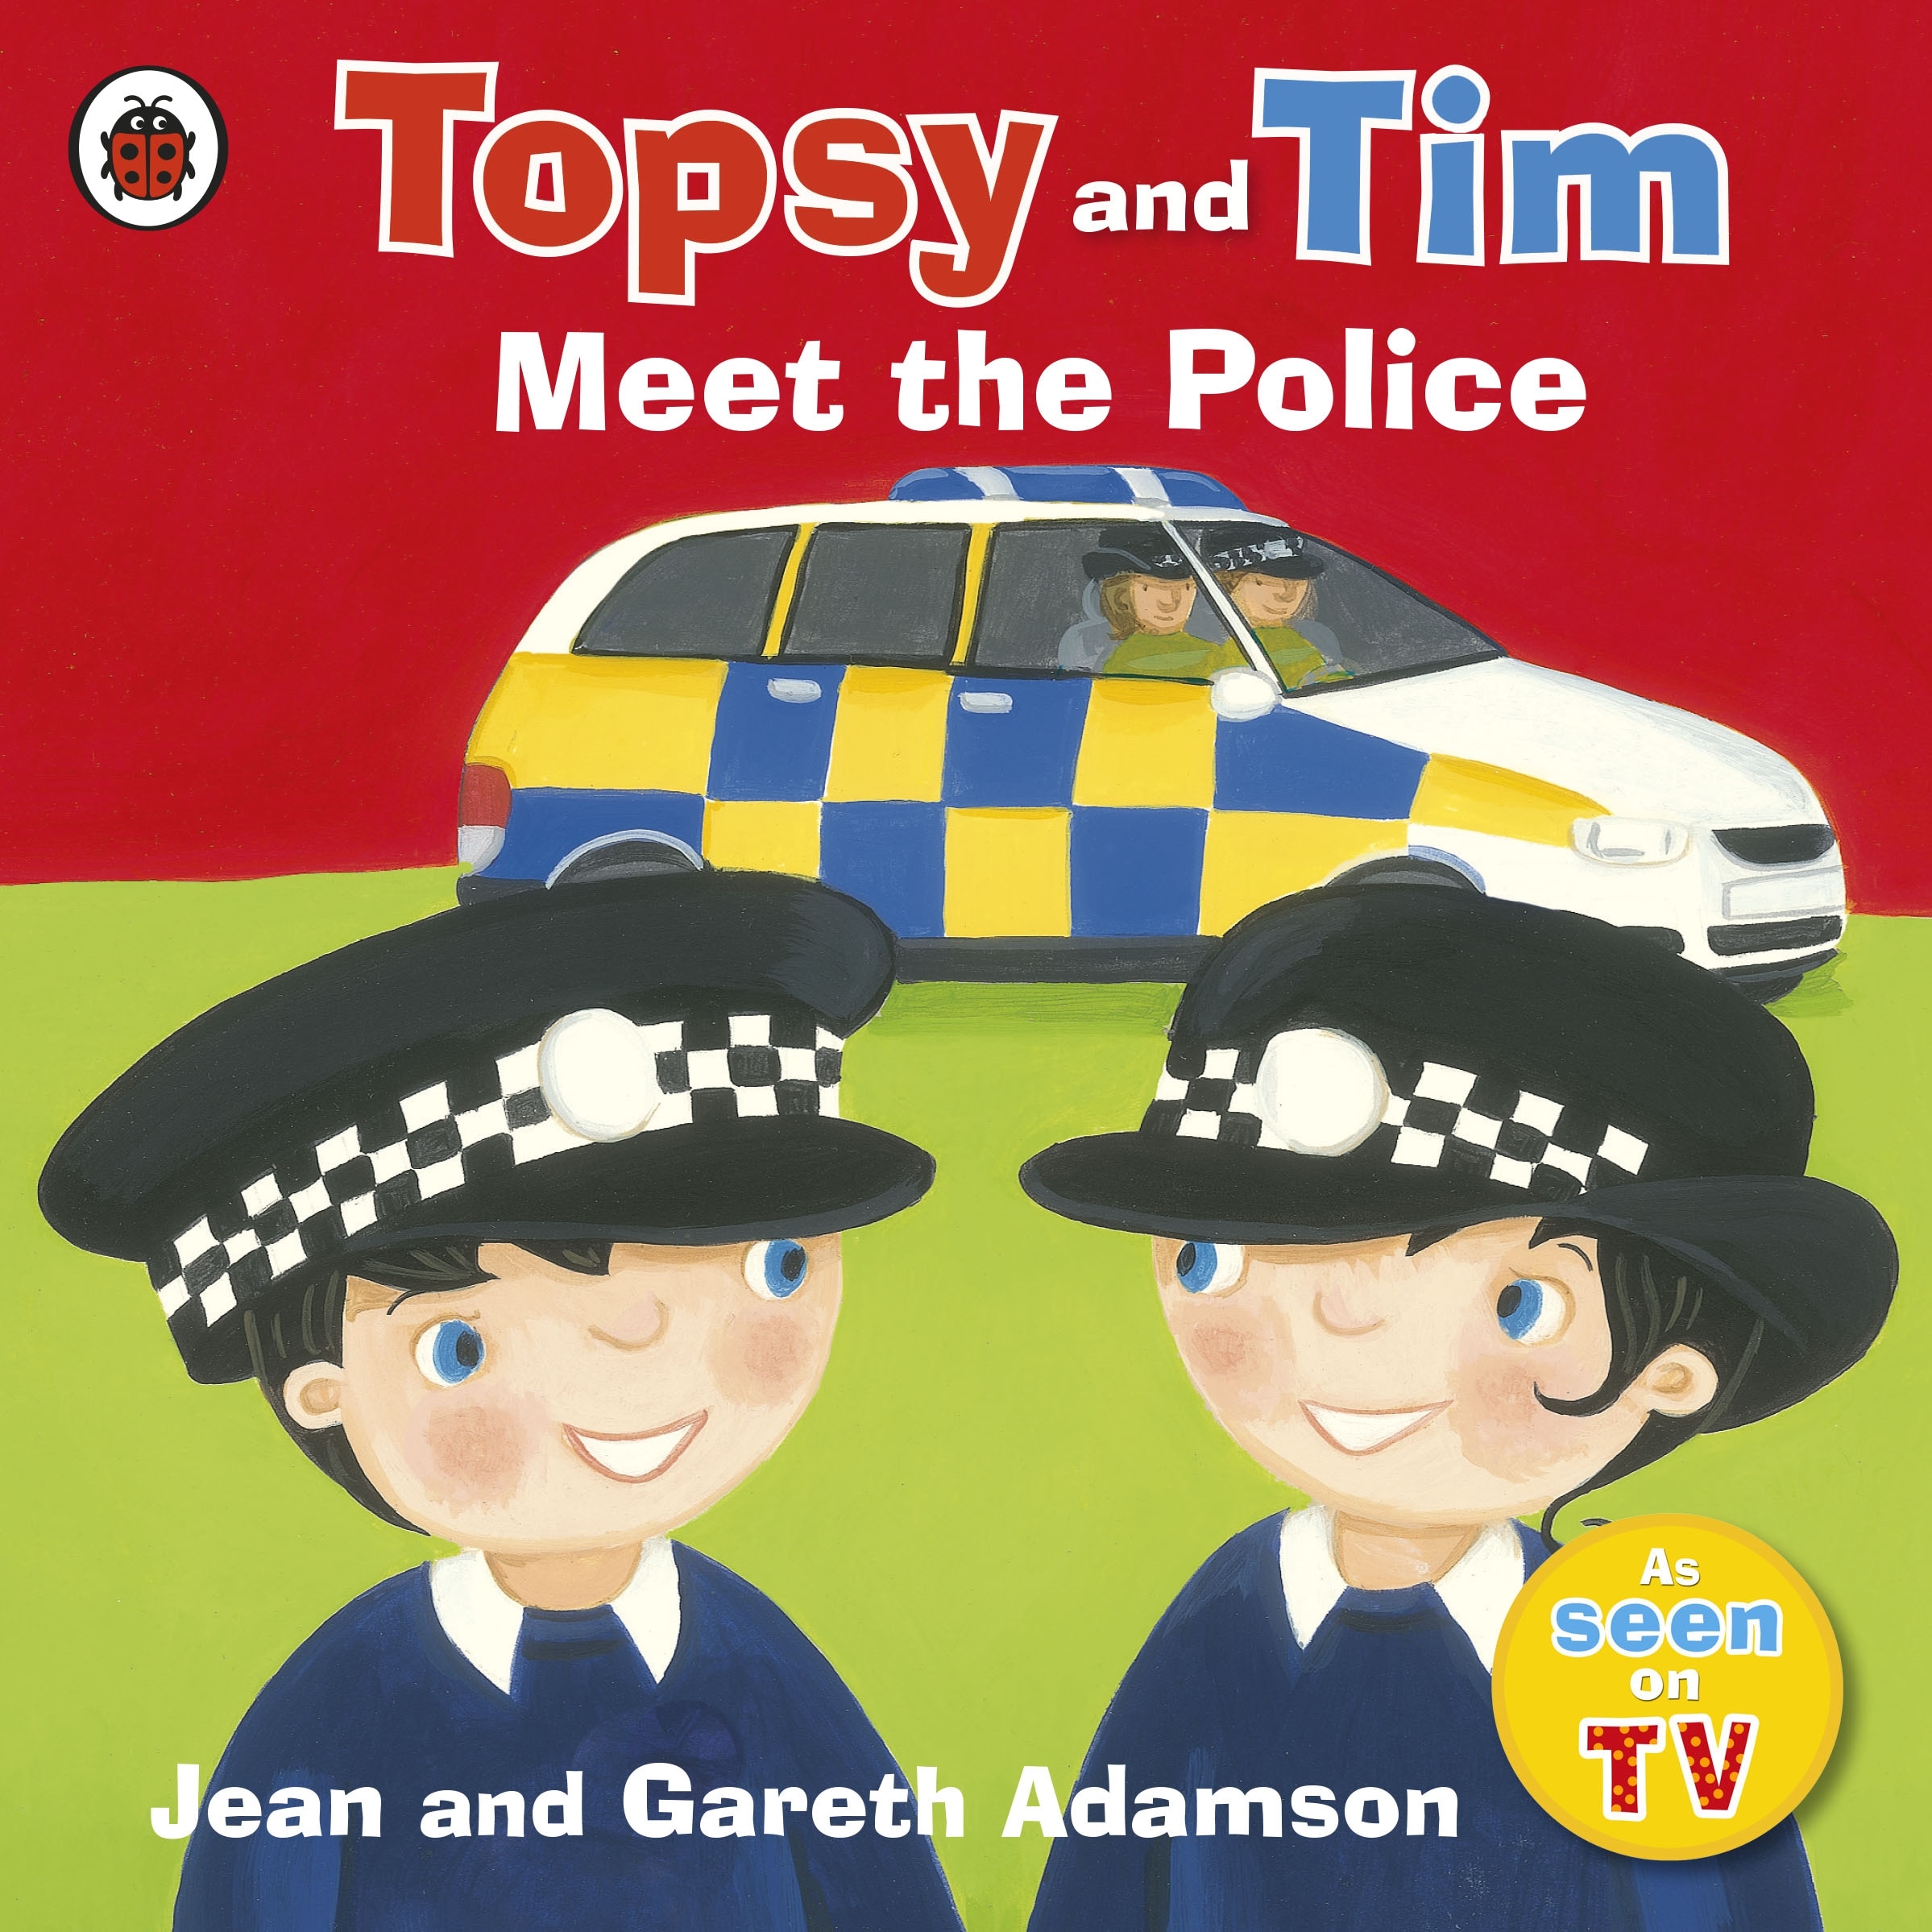 Book “Topsy and Tim: Meet the Police” by Jean Adamson — June 2, 2011